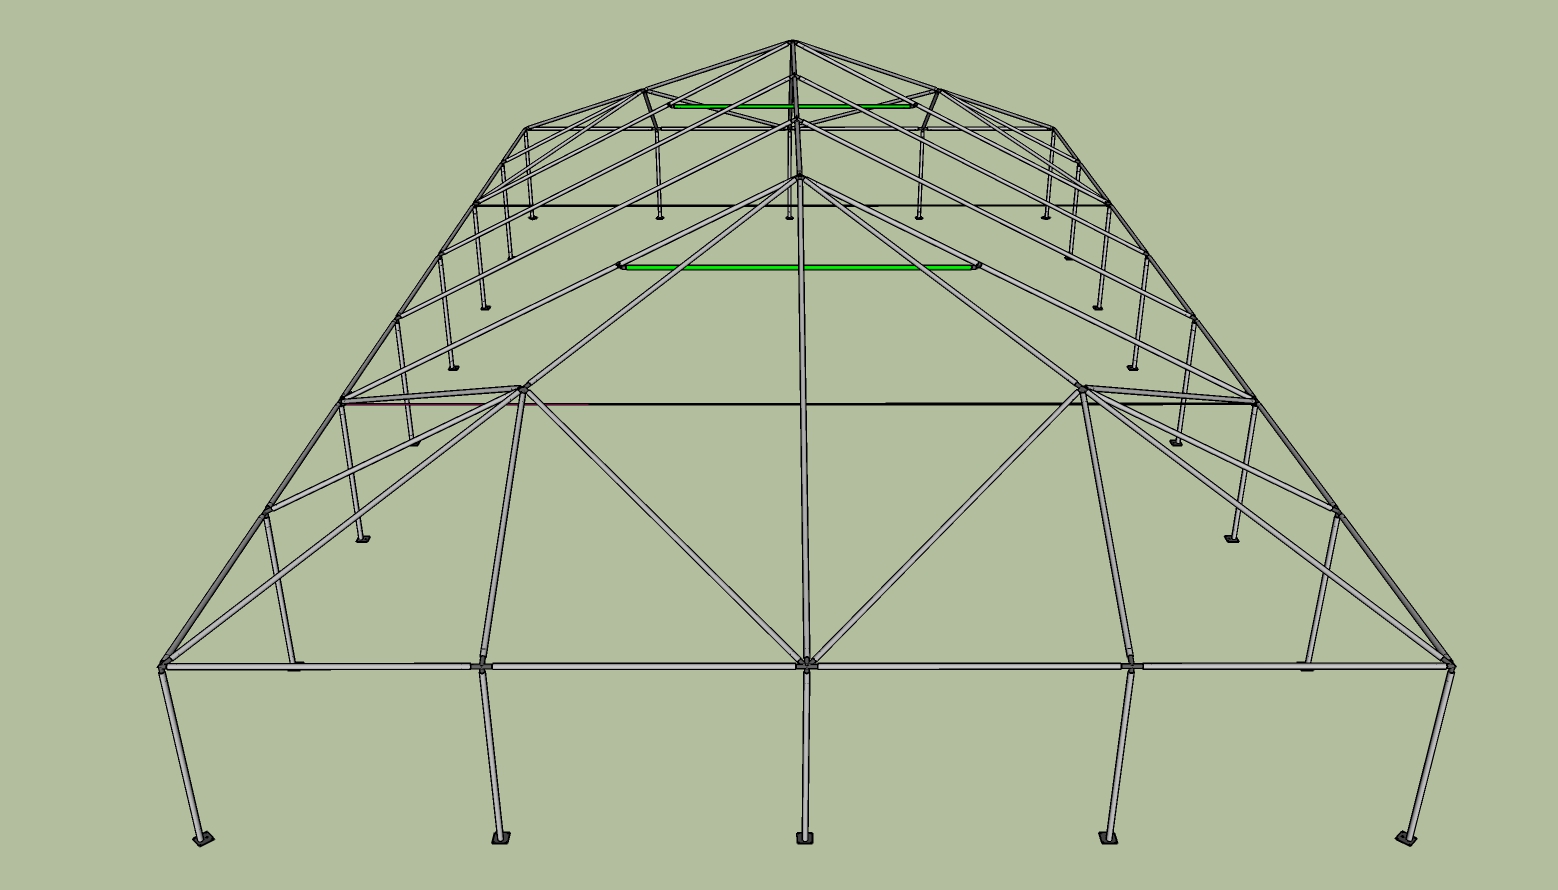 40x70 frame tent side view